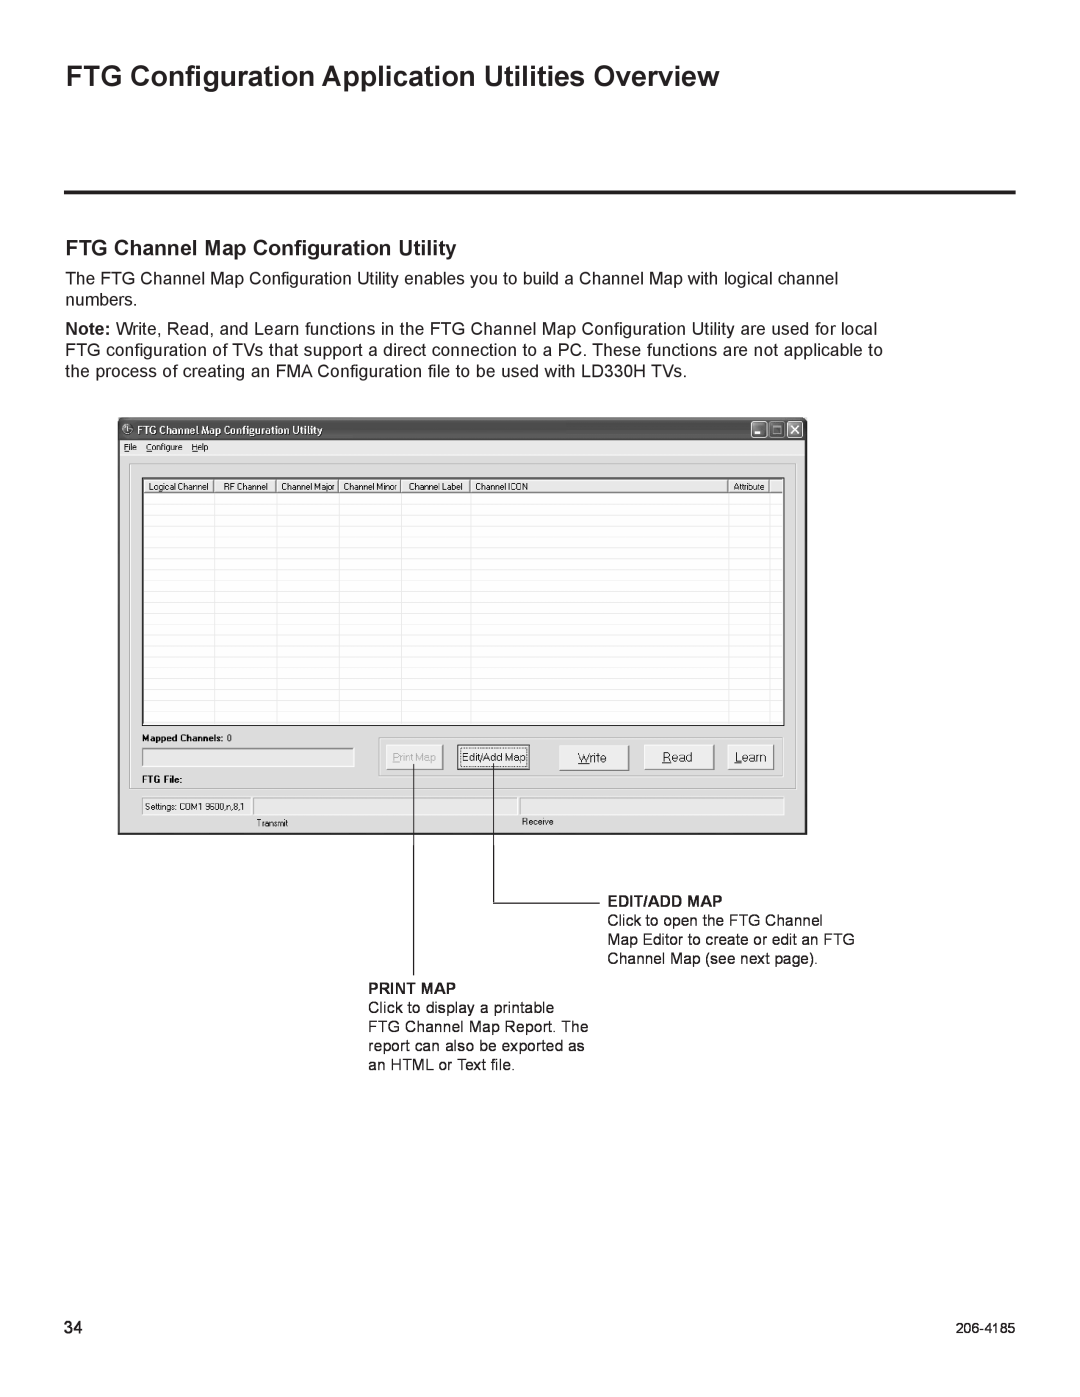 LG Electronics 32LD330H, 37LD330H FTG Configuration Application Utilities Overview, FTG Channel Map Configuration Utility 